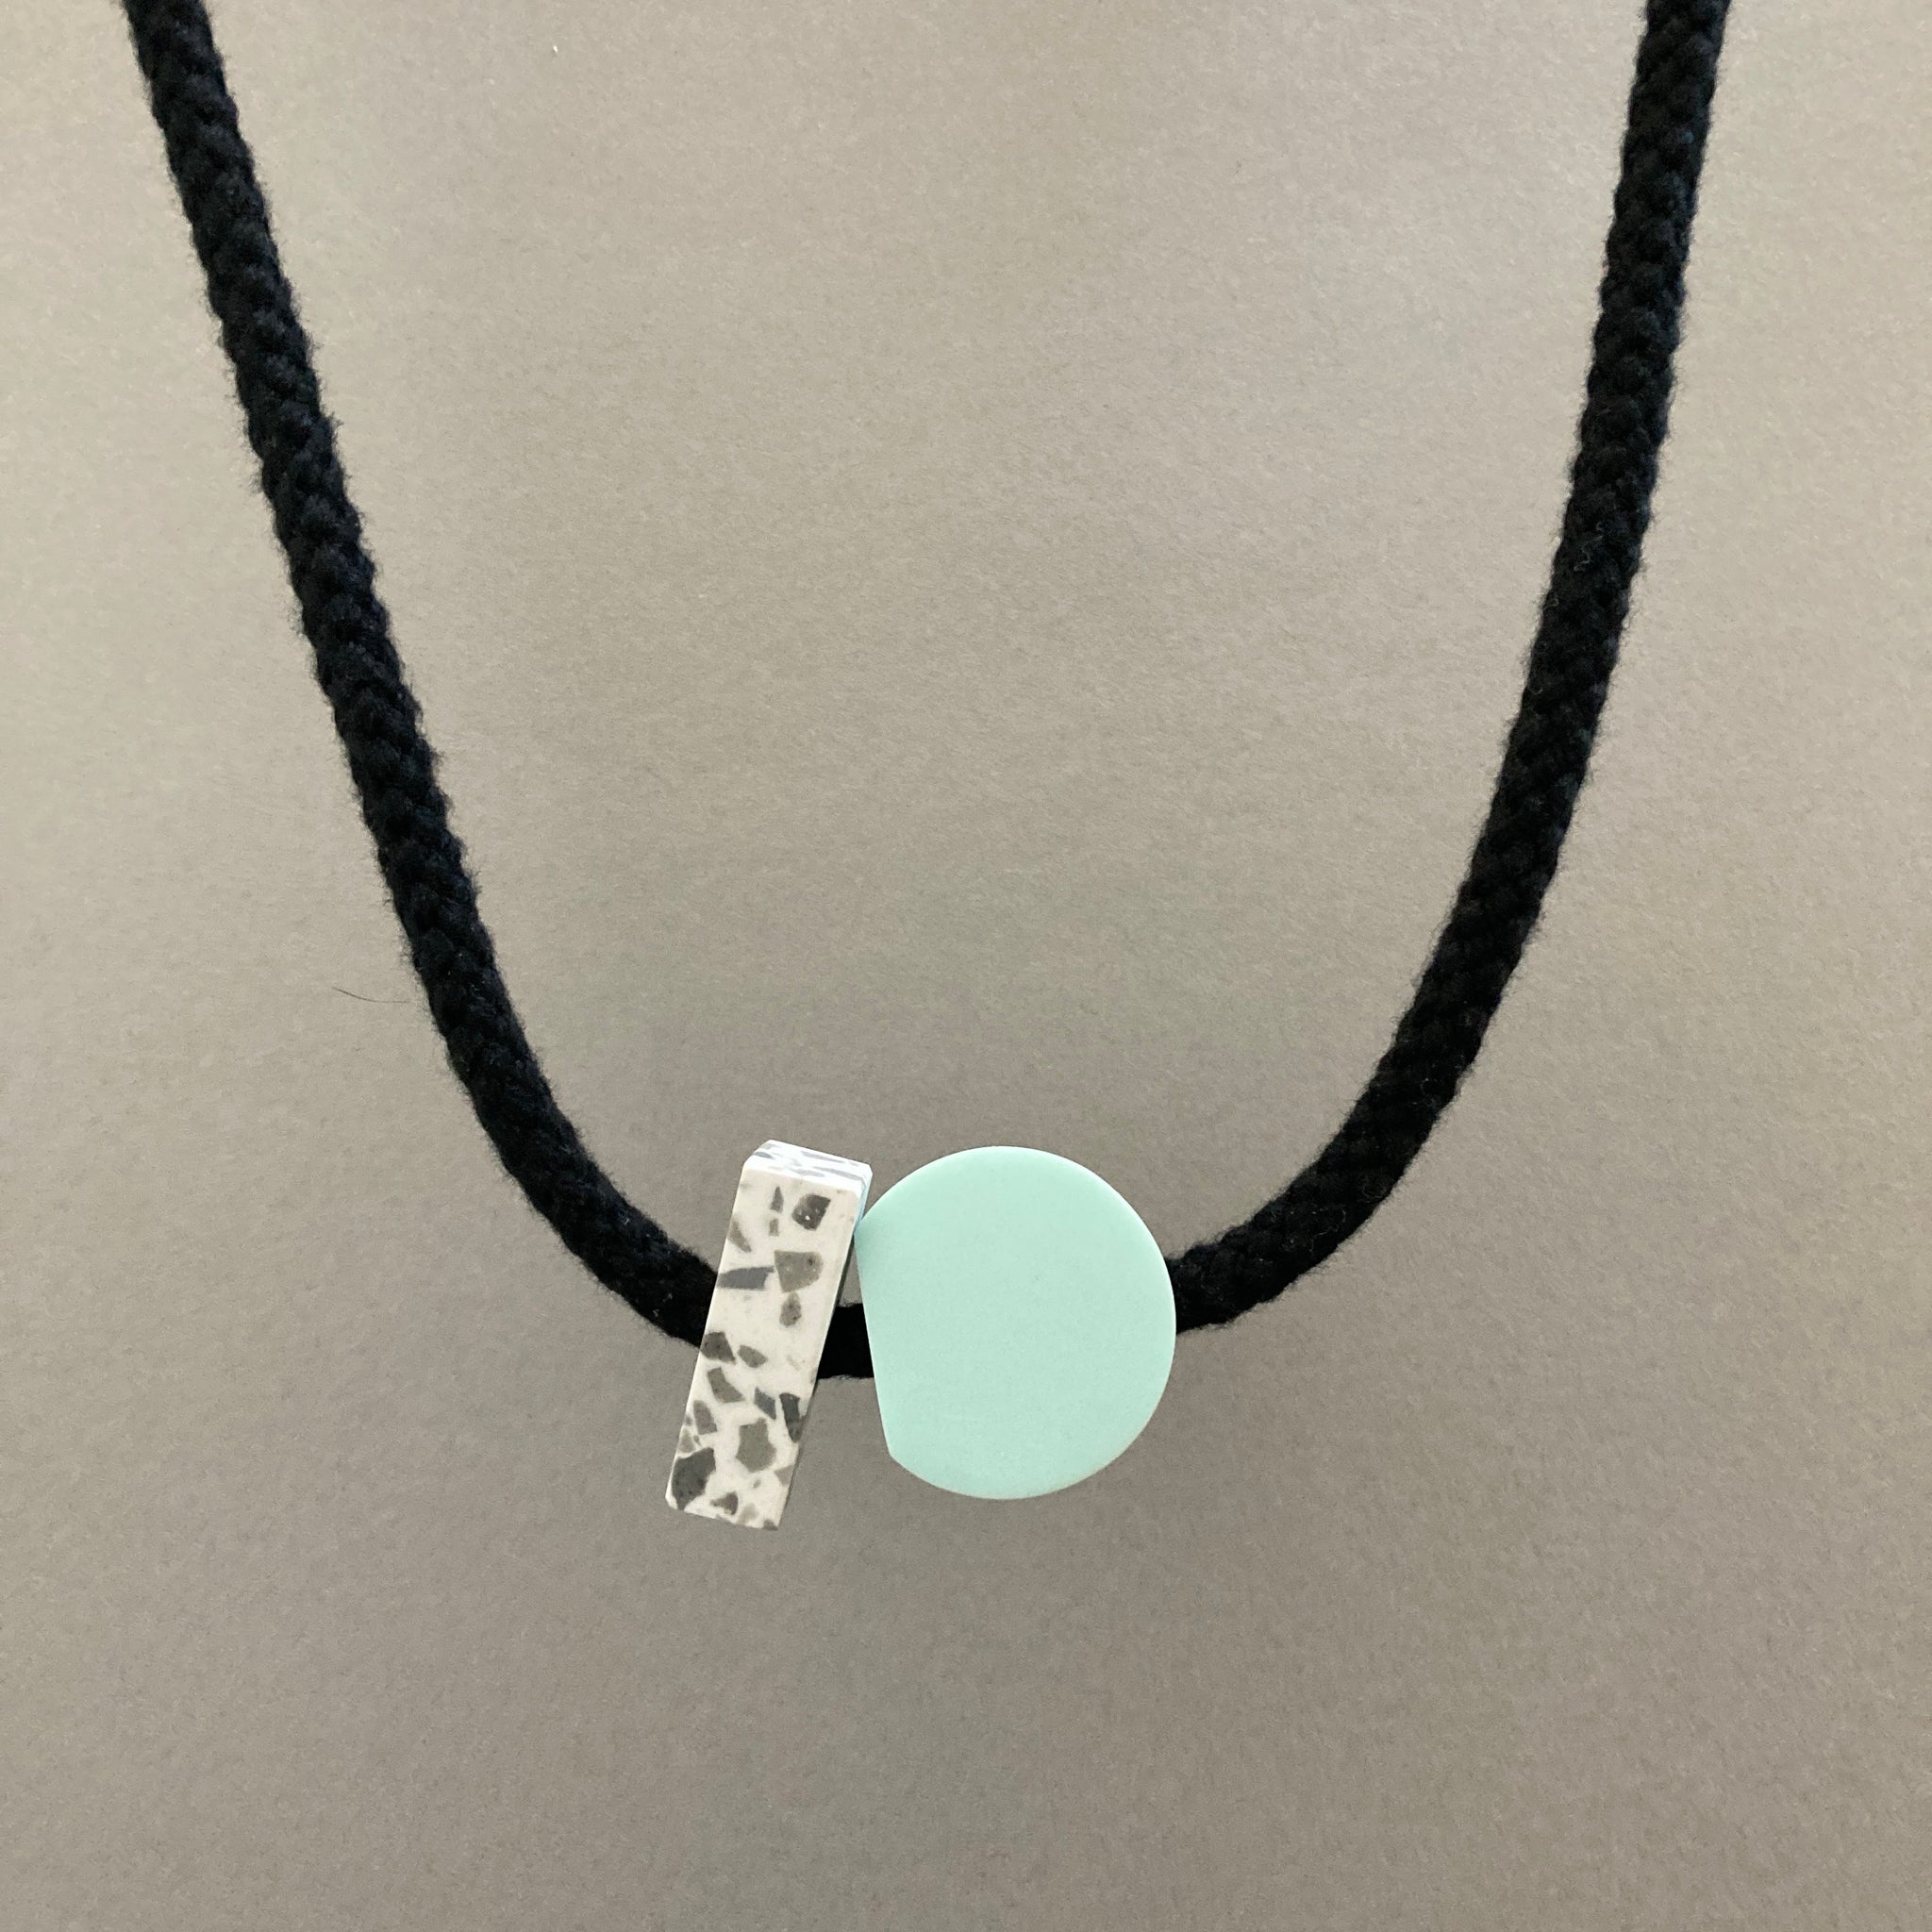 One-off mint necklace